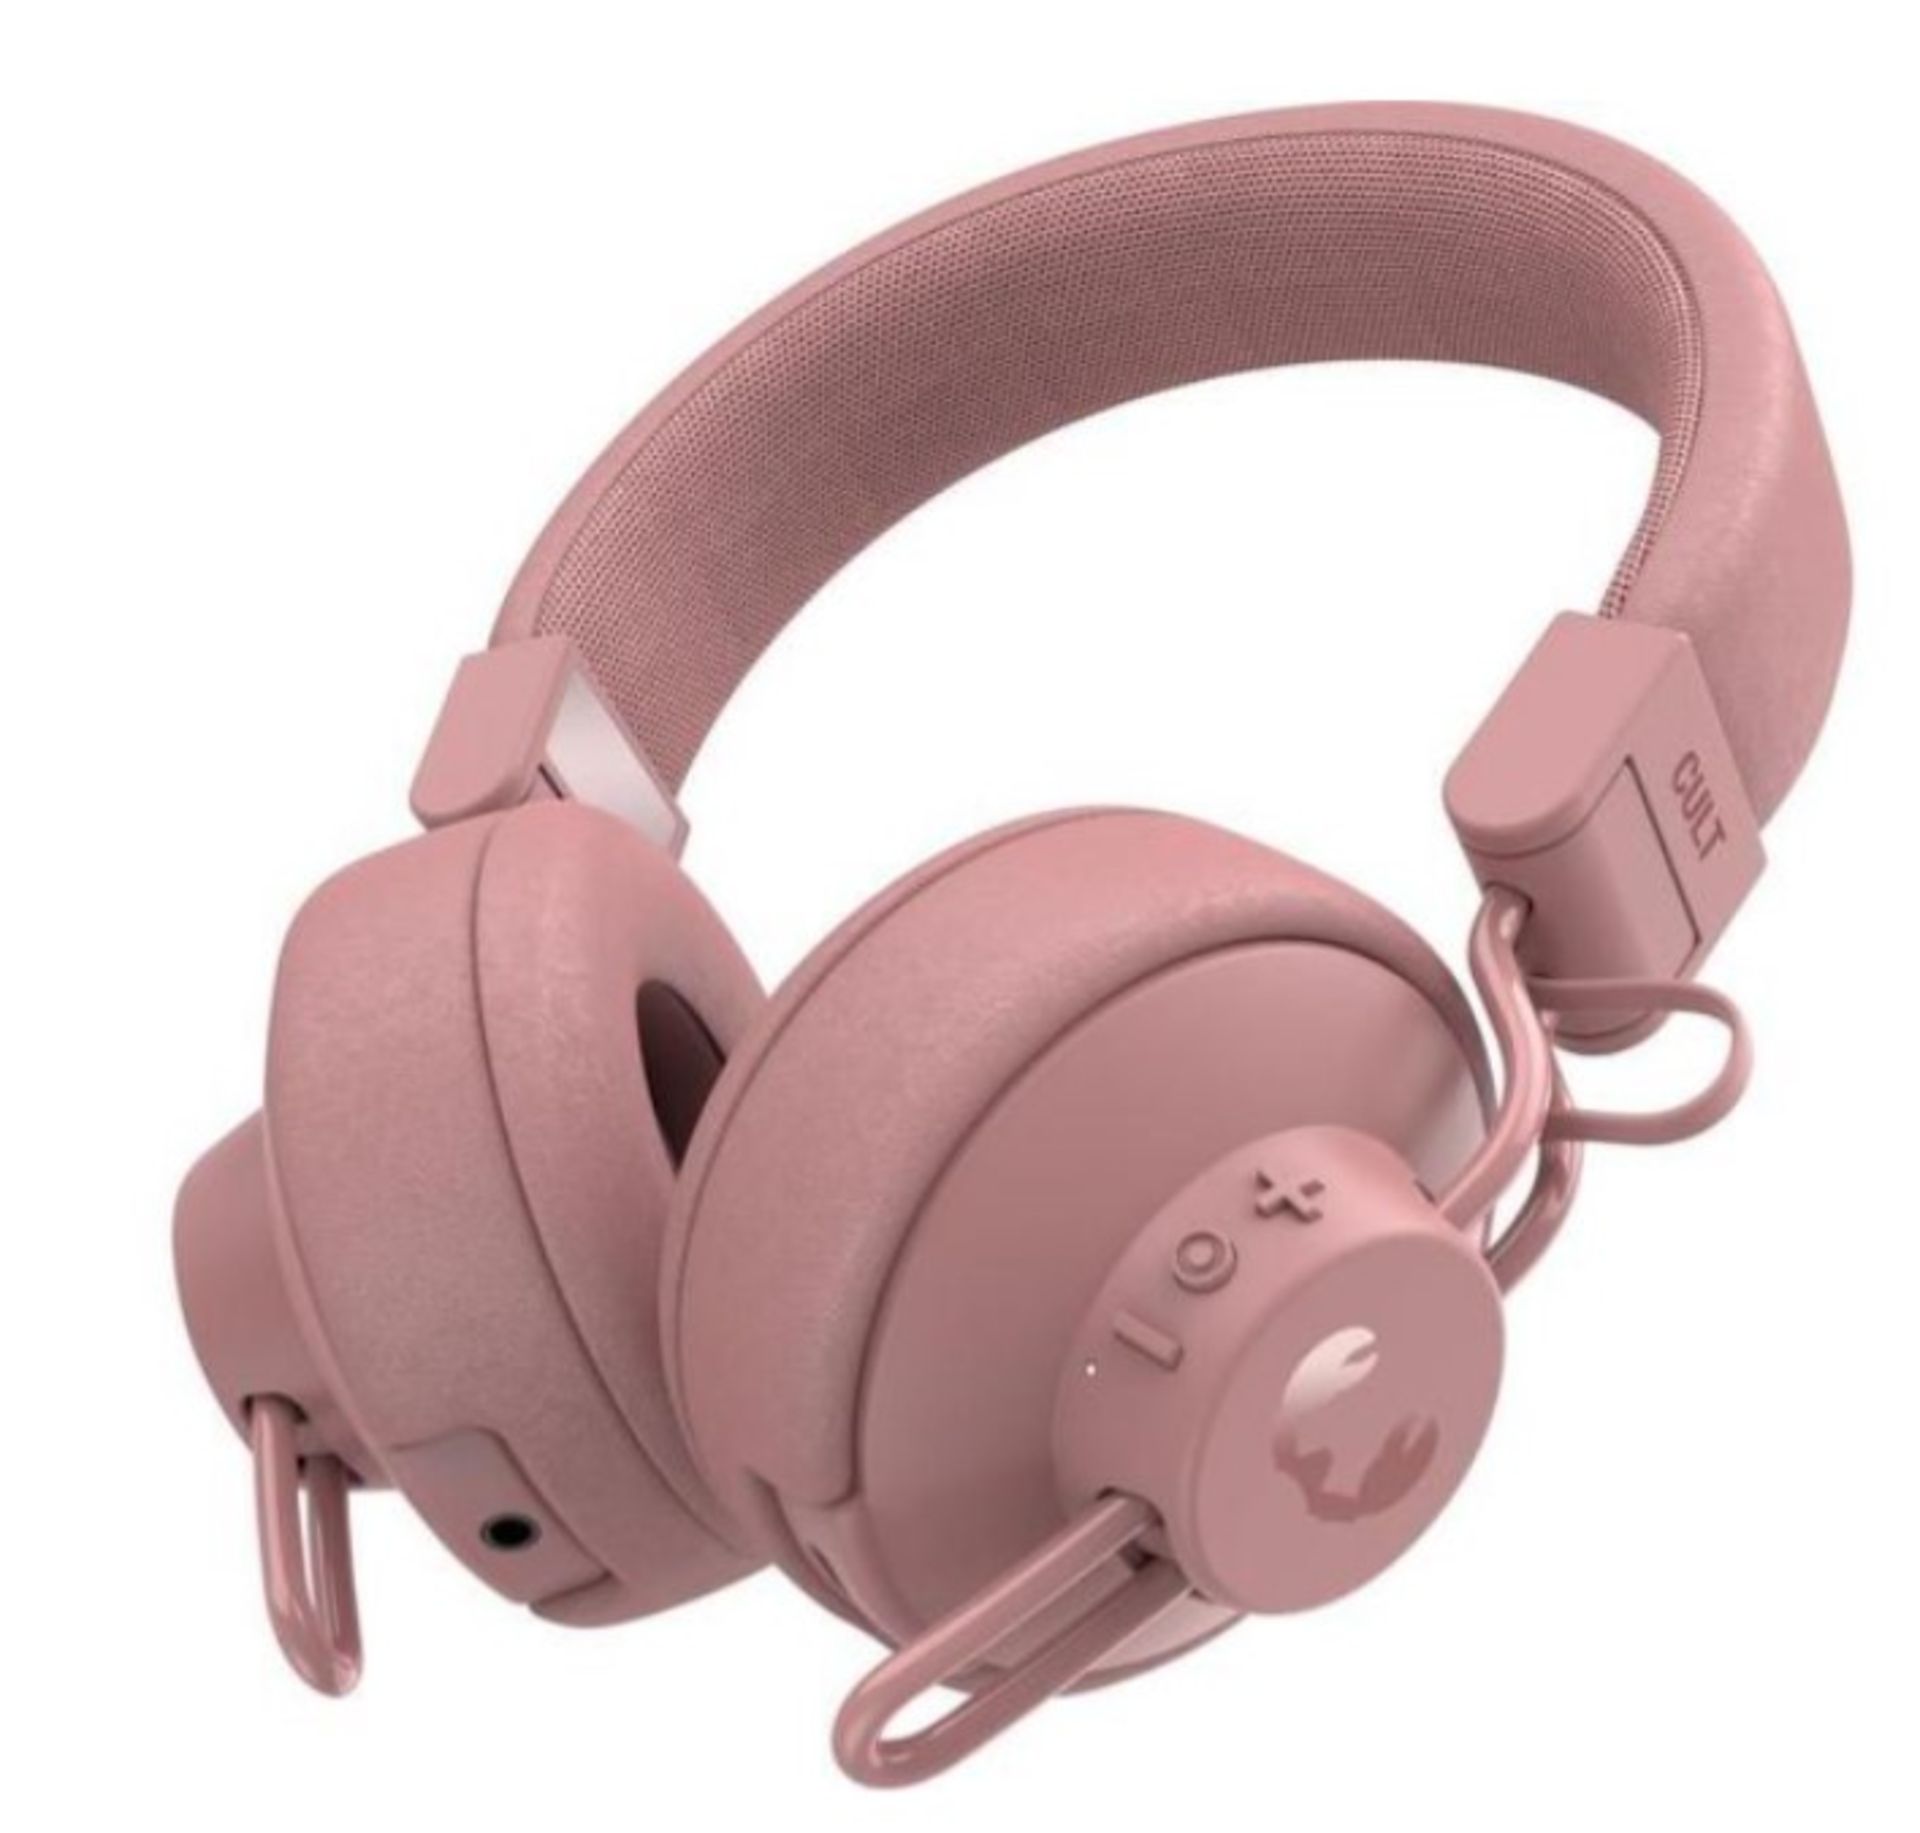 Fresh 'n Rebel Cult Headphones. PINK. Fall for the retro vibe, cool design and colourful looks of